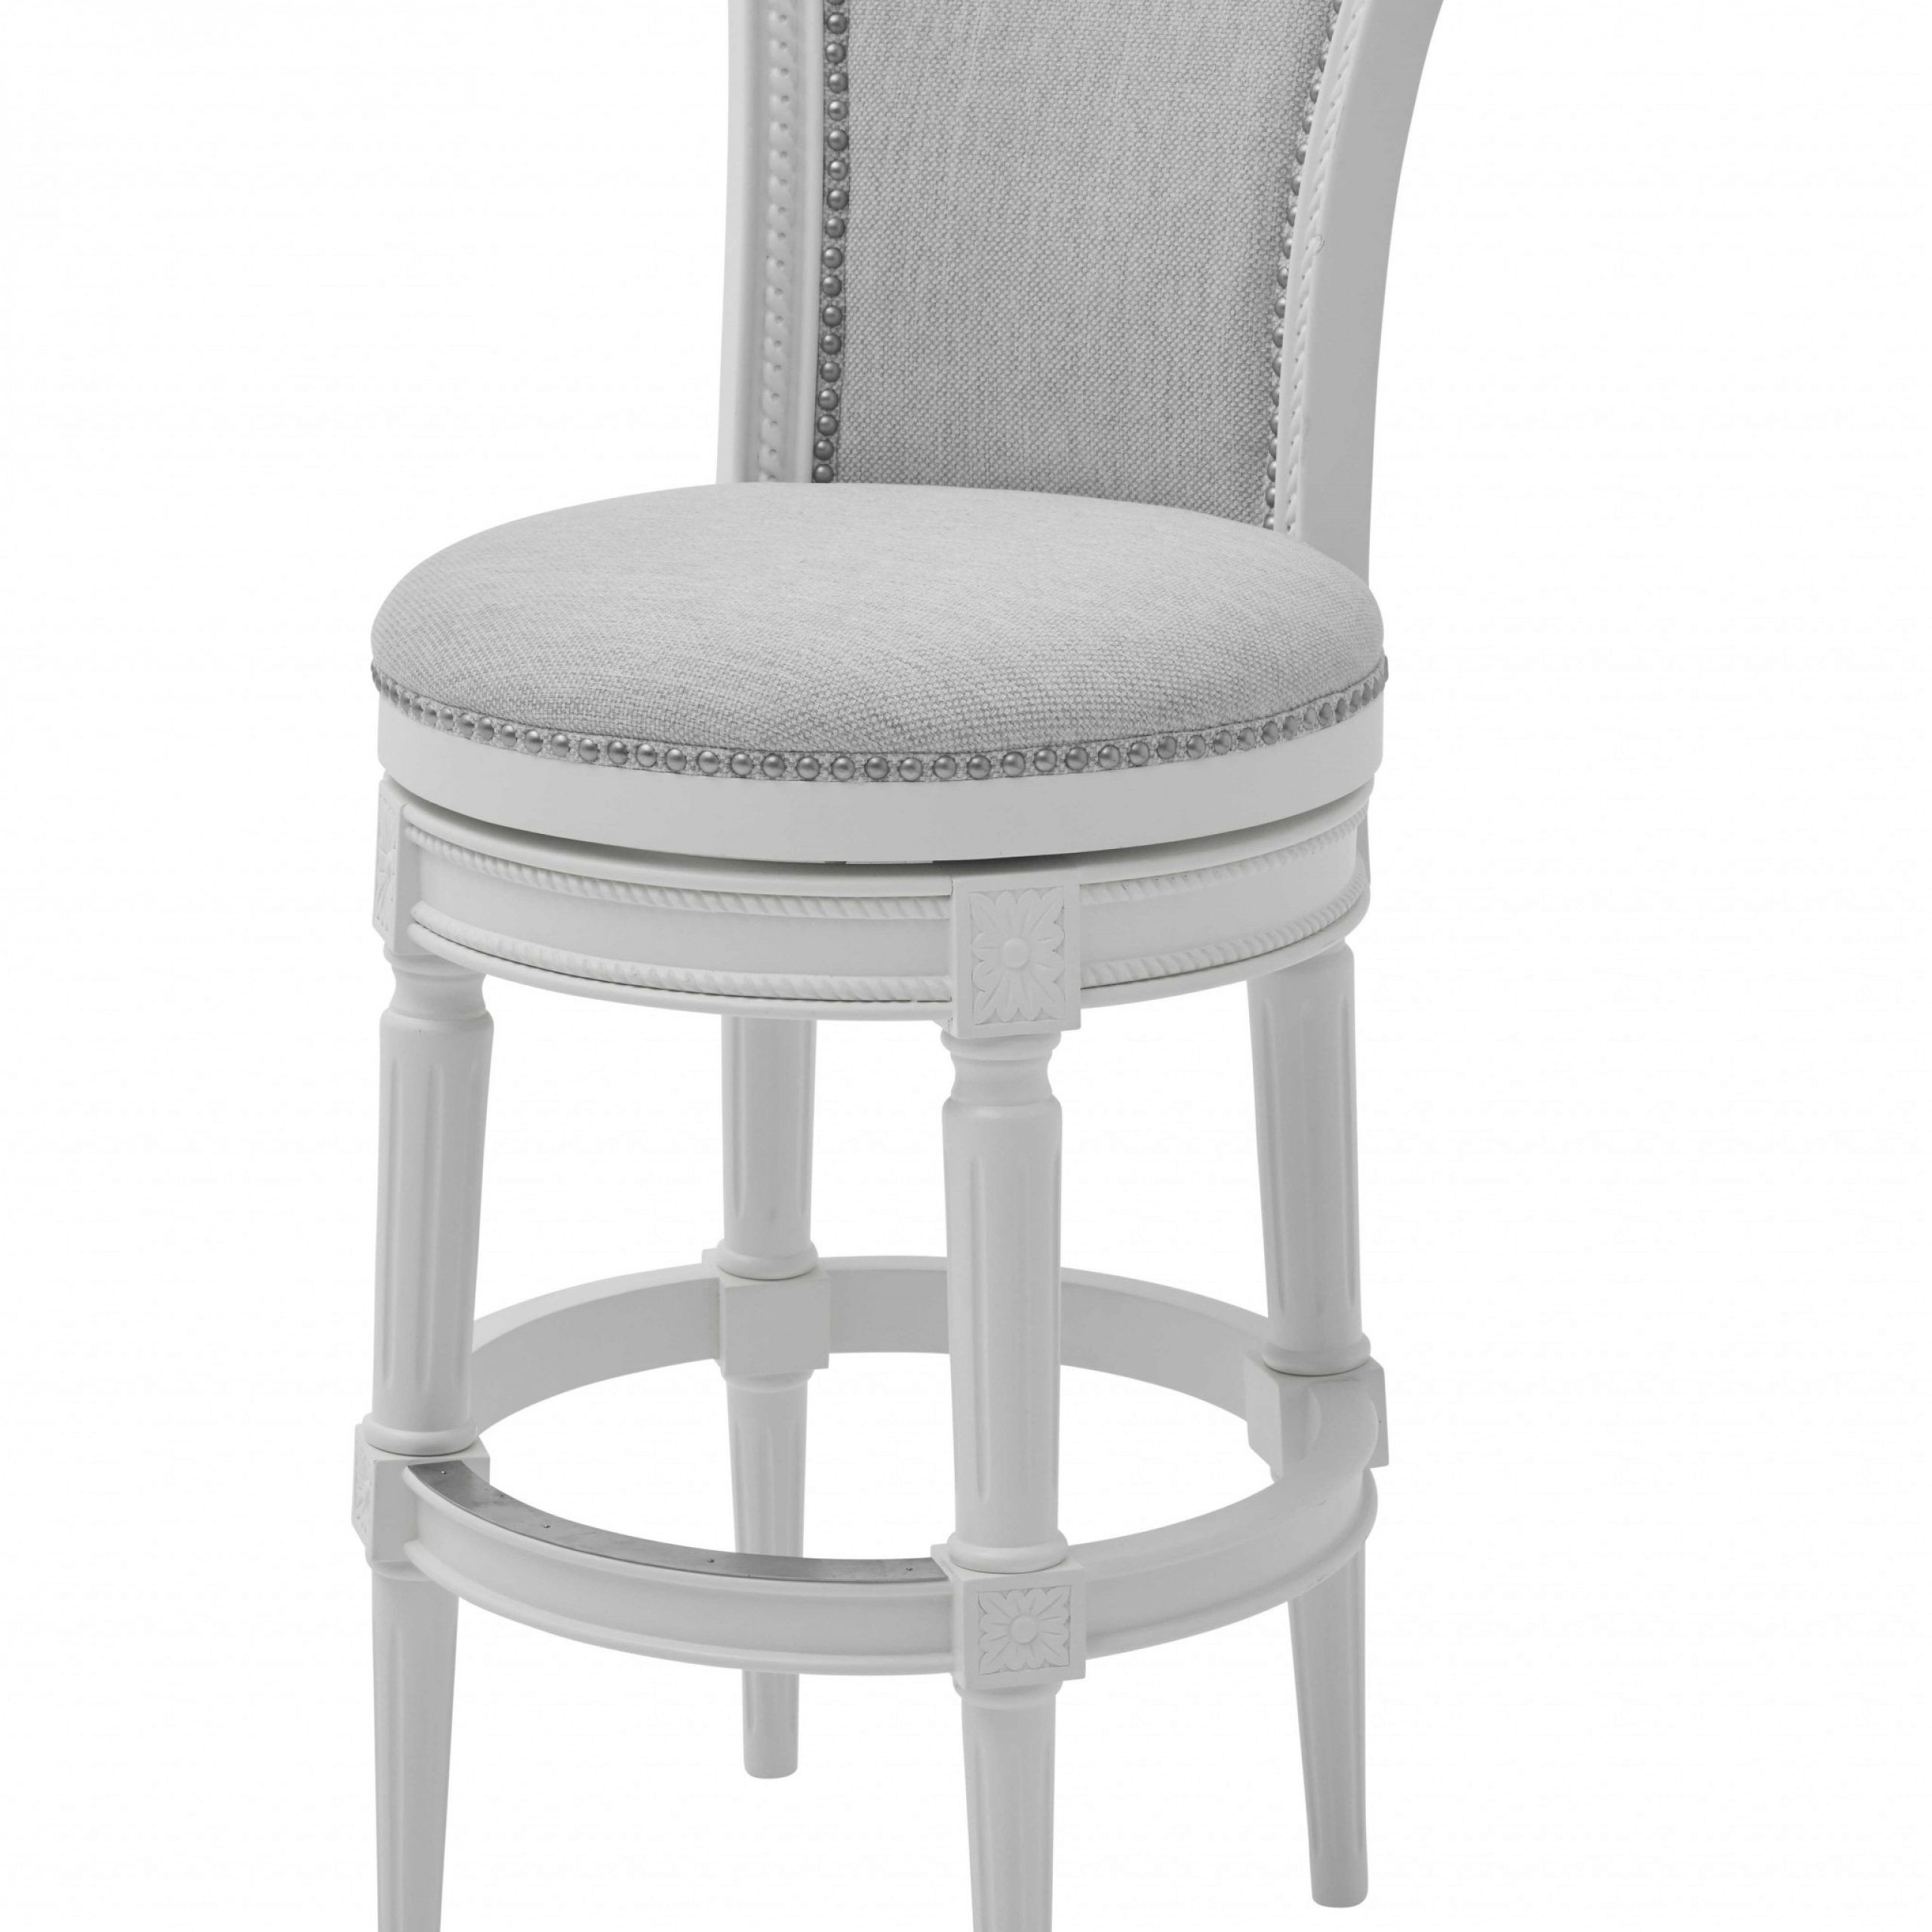 Modern Farmhouse White Swivel Bar Stool Regarding White Washed Wood Accent Stools (View 12 of 20)